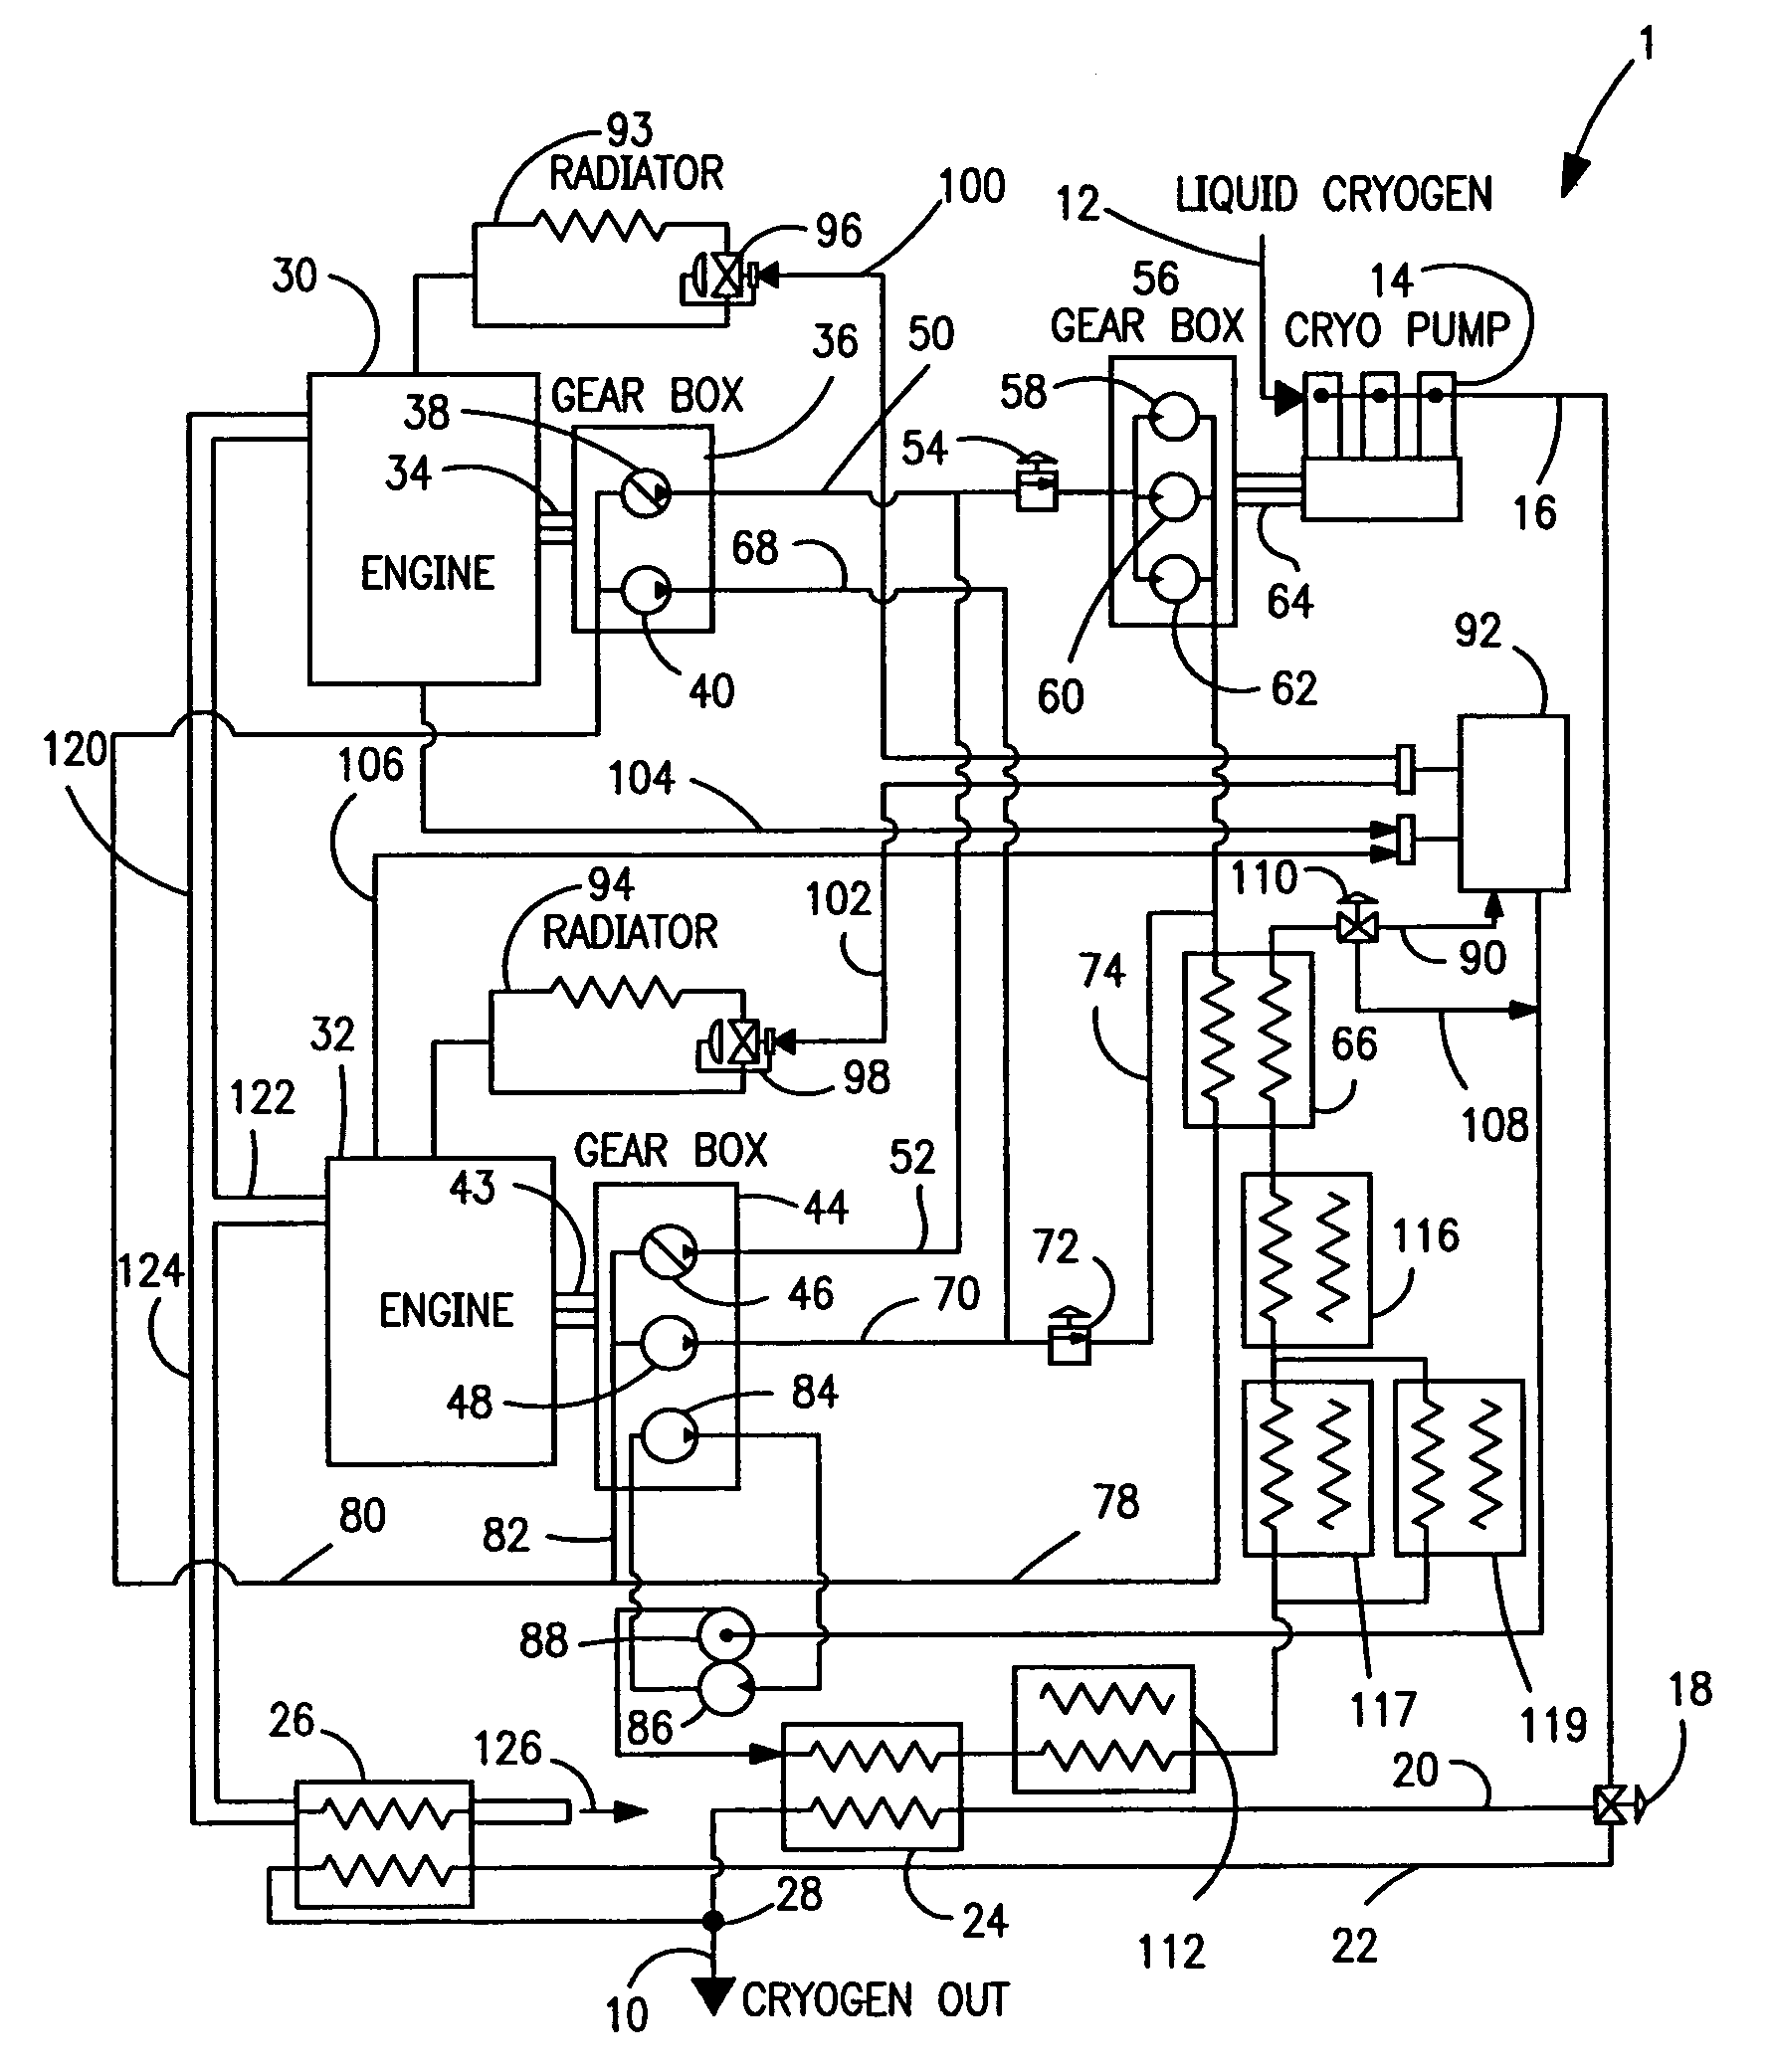 Apparatus and method for producing a pressurized vapor stream